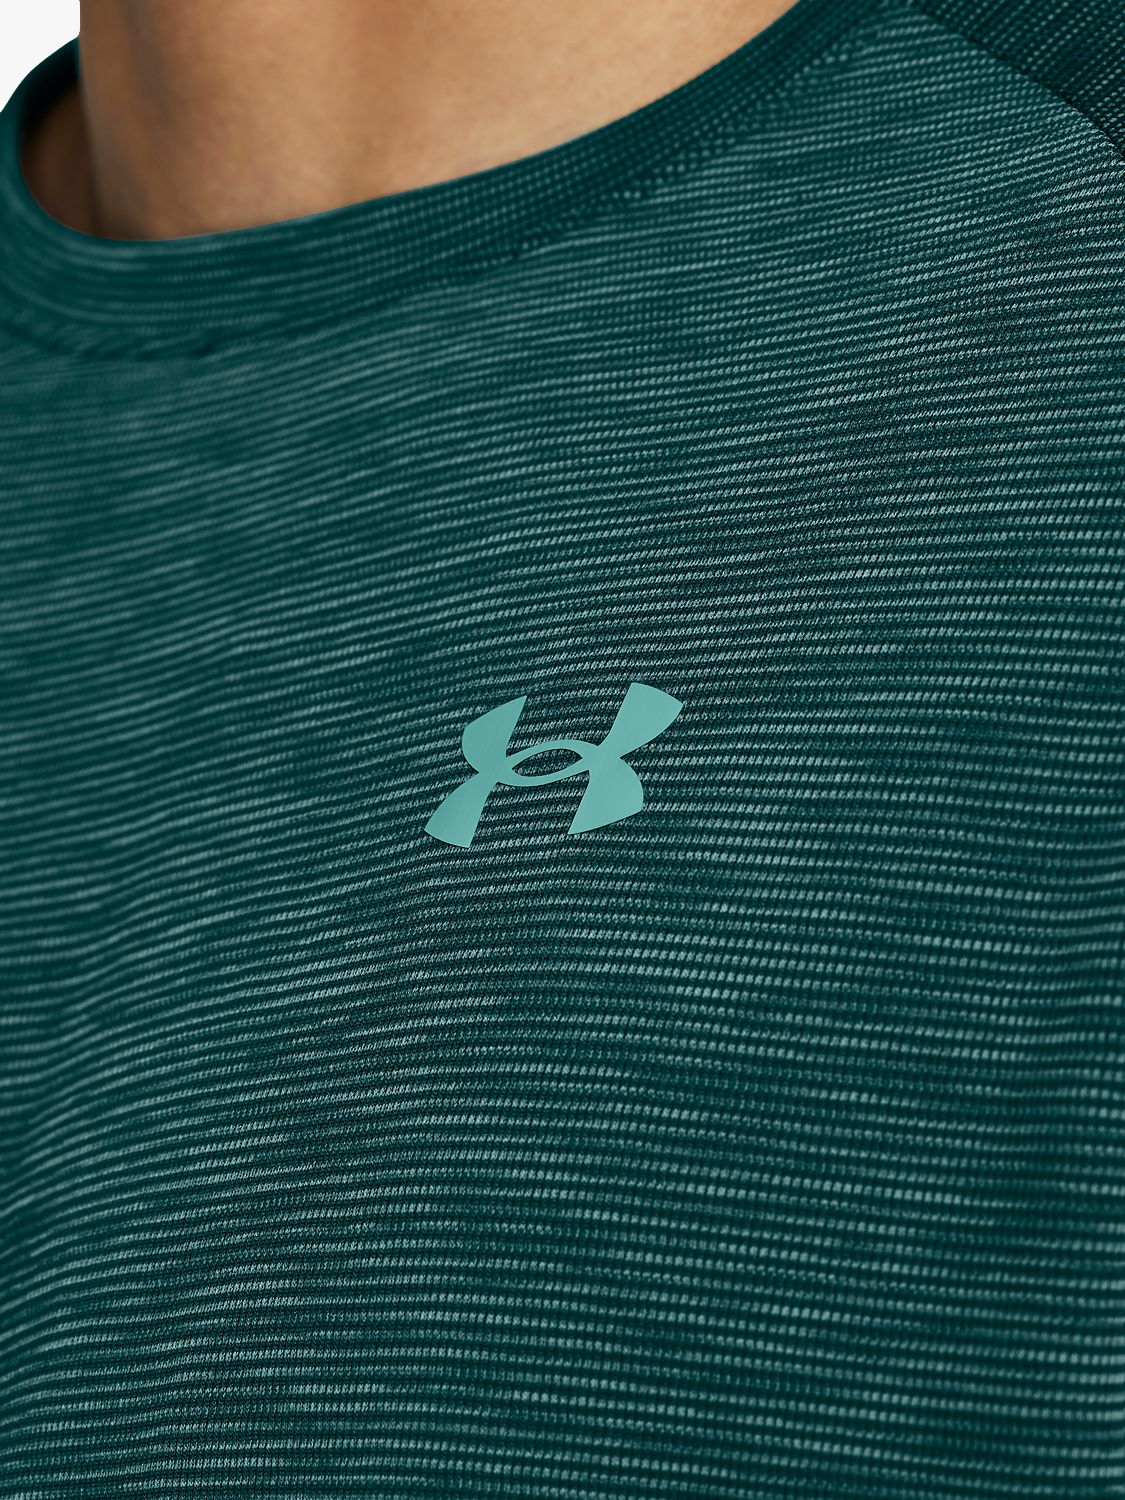 Under Armour Tech Gym Top, Teal/Turquoise, S